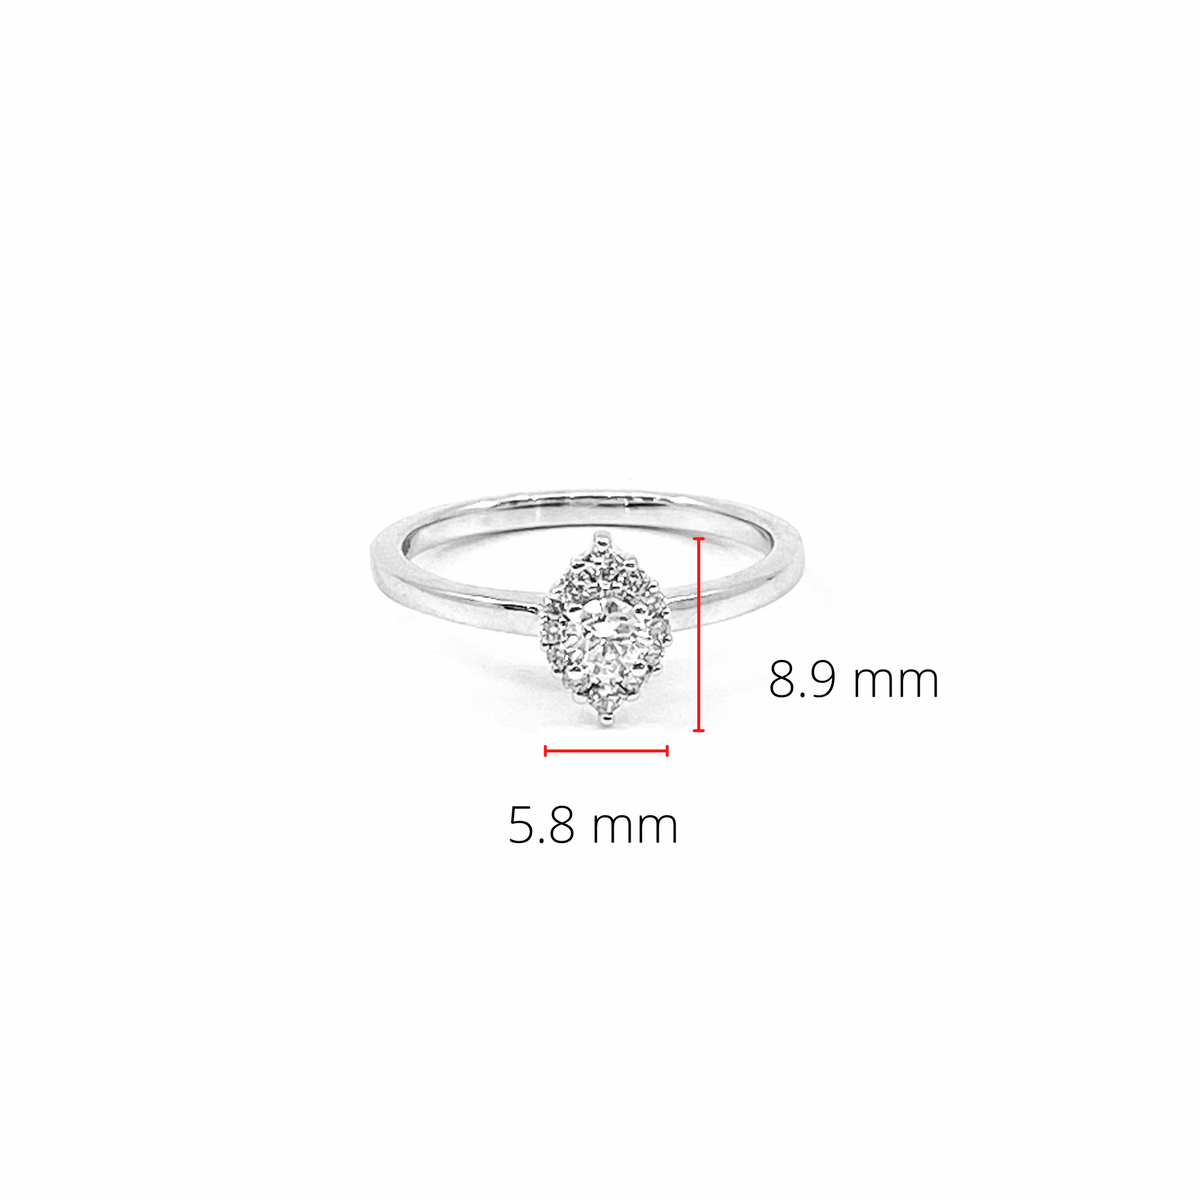 10K White Gold 0.30cttw Canadian Diamond Halo Engagement Ring, size 6.5